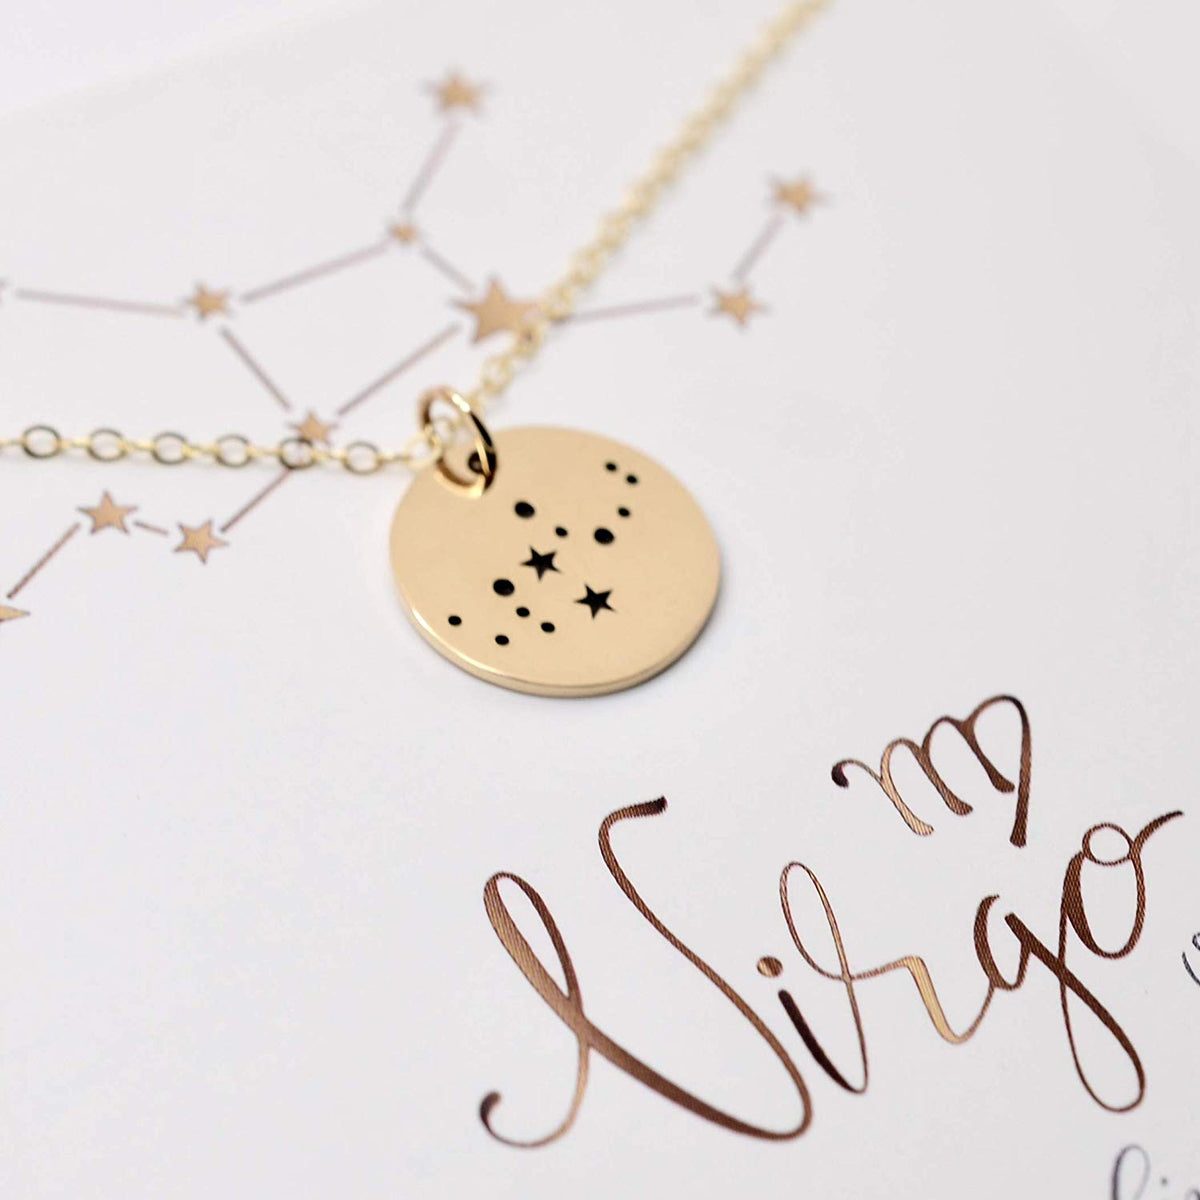 Virgo Zodiac Sign 14K Gold Filled Constellation Necklace - Love It Personalized